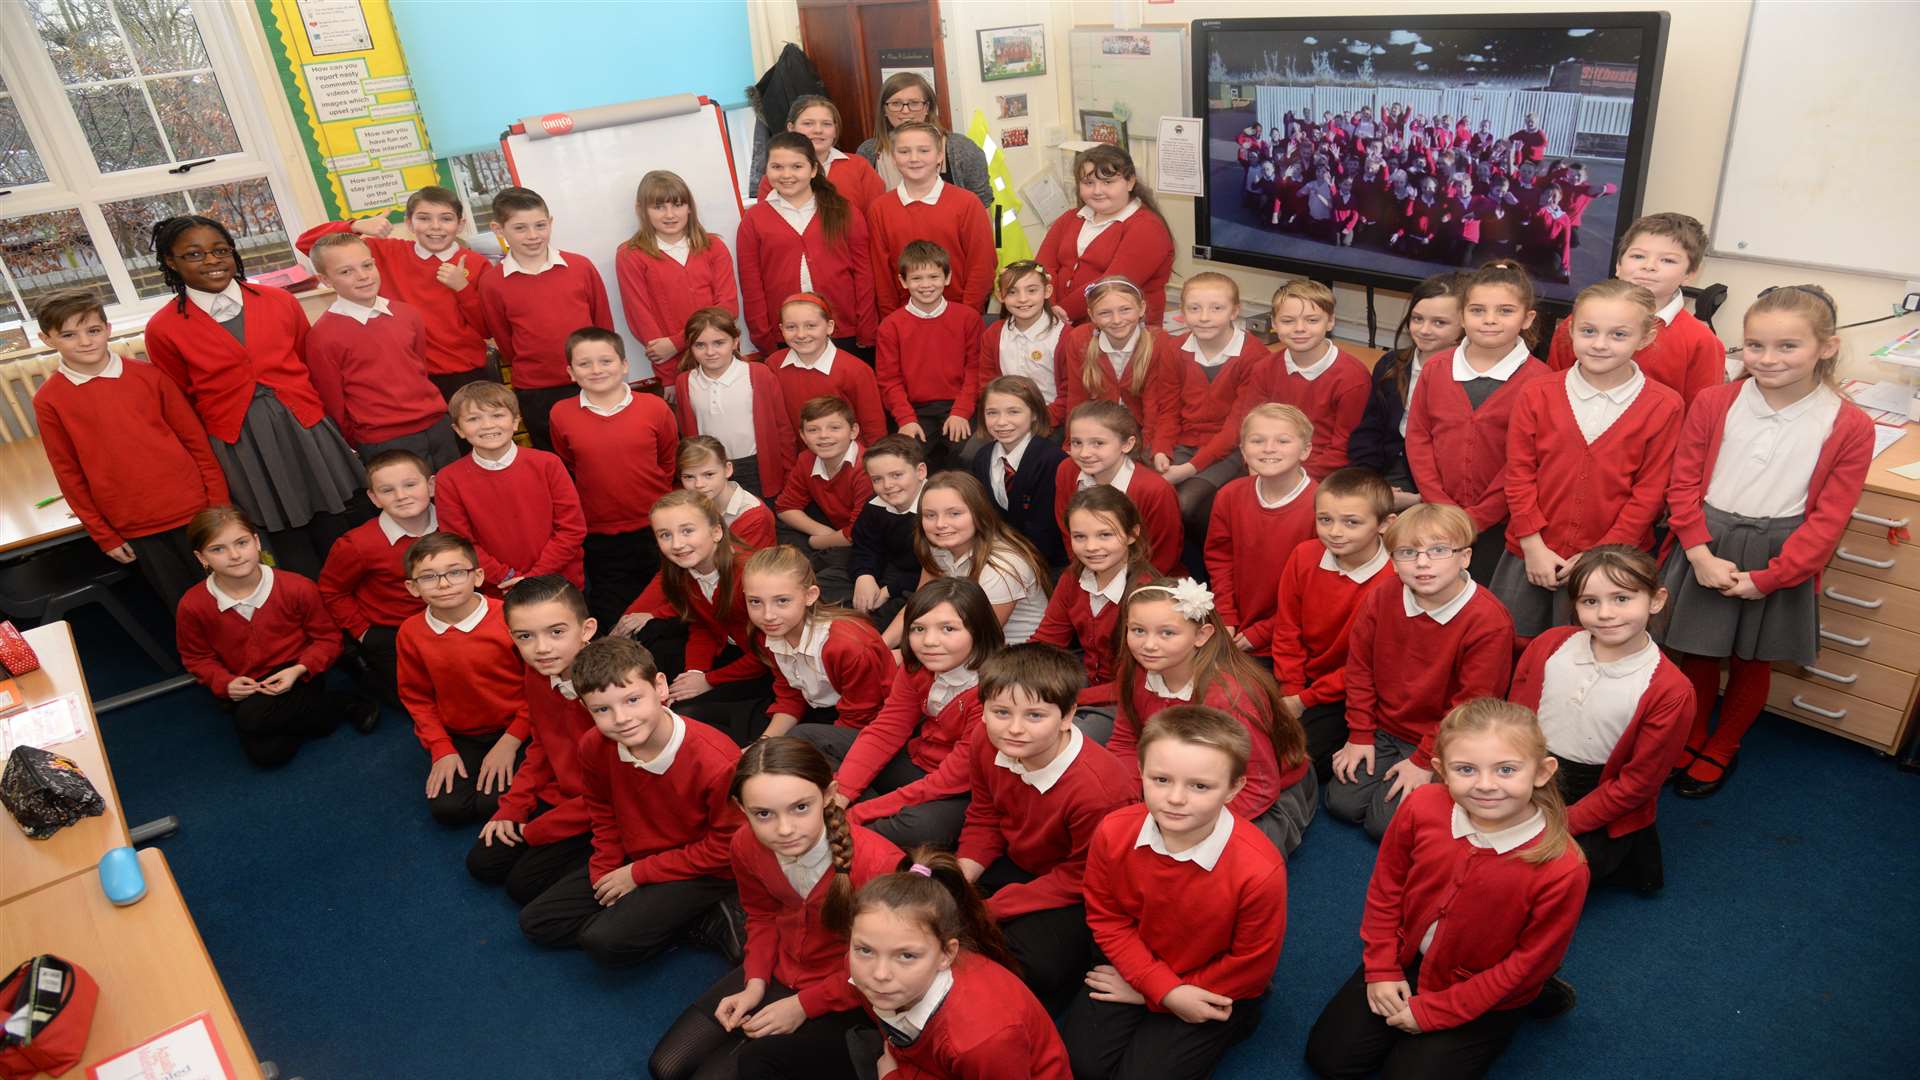 Children at Queenborough Primary School who have made a YouTube video miming along to Ed Sheerhan's Talking Out Loud for charity